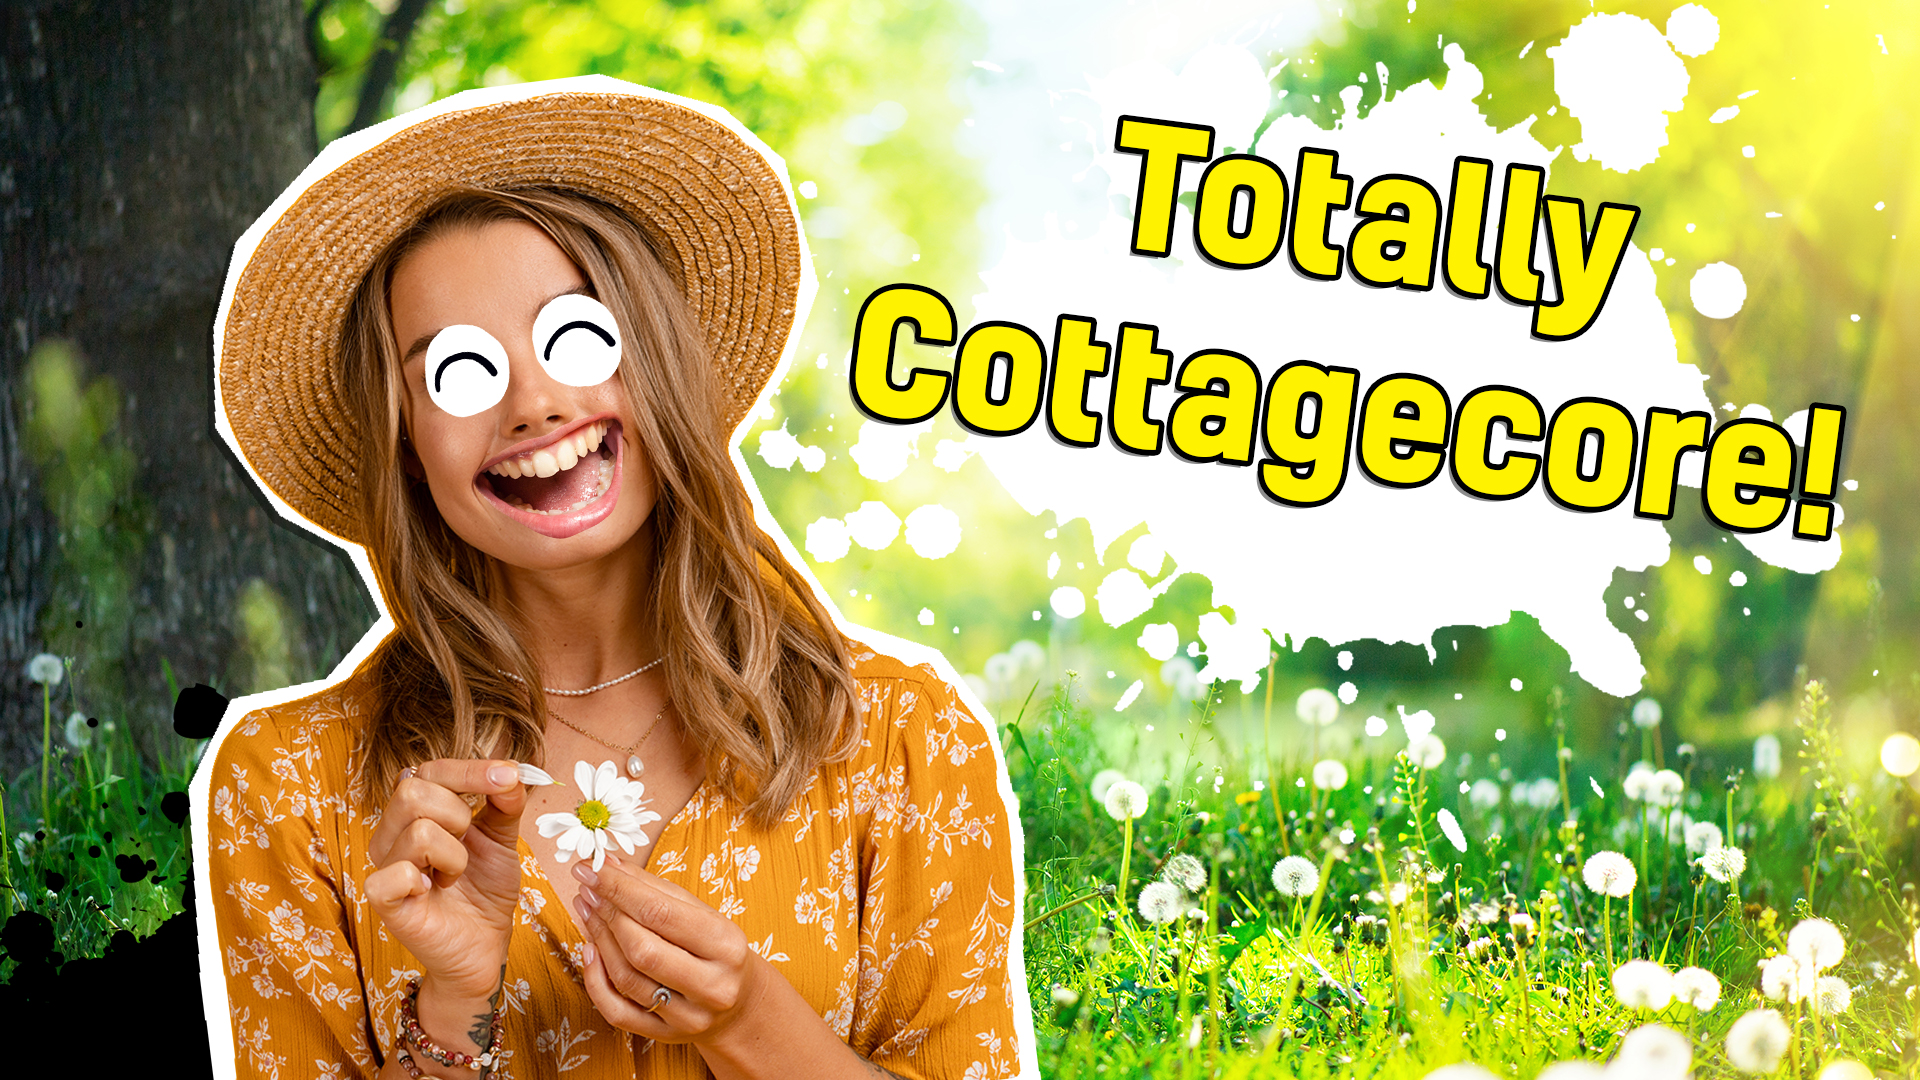 Totally cottagecore